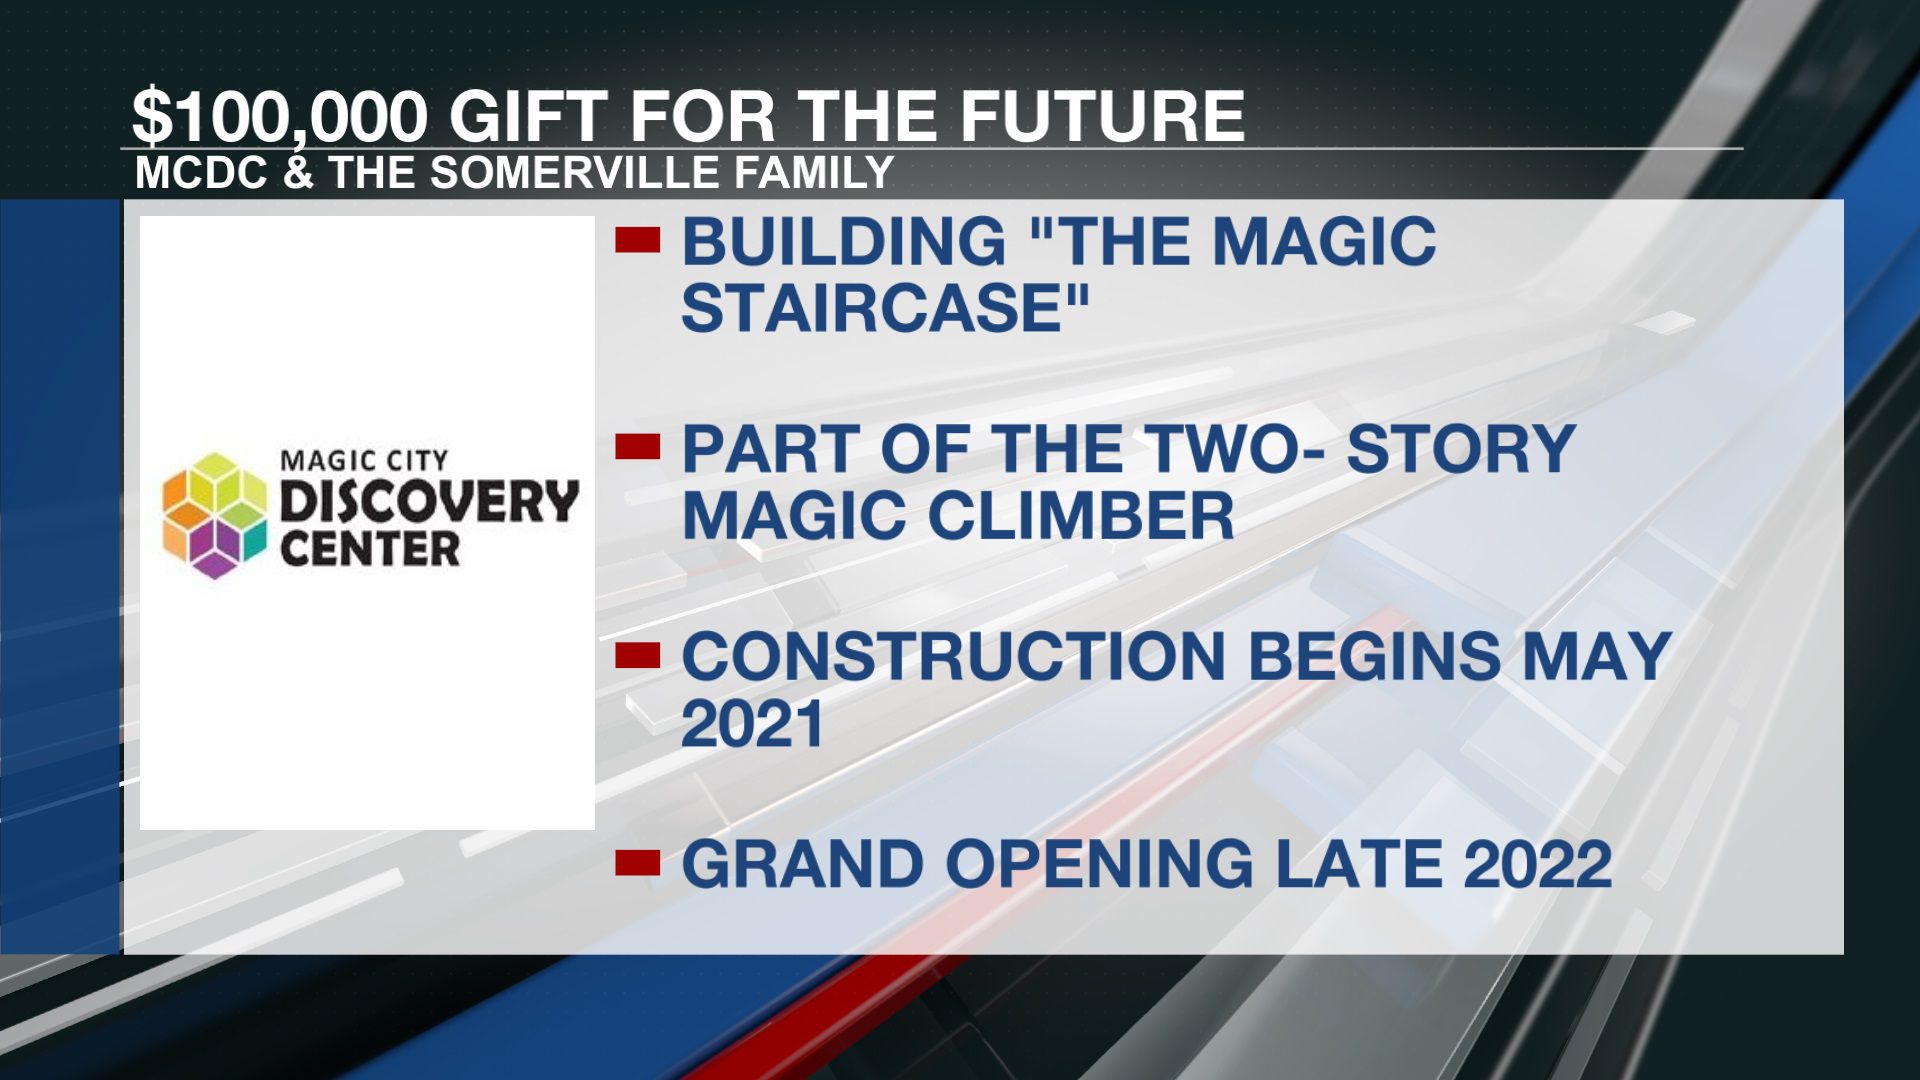 Somerville gift to sponsor Magic Staircase at discovery center